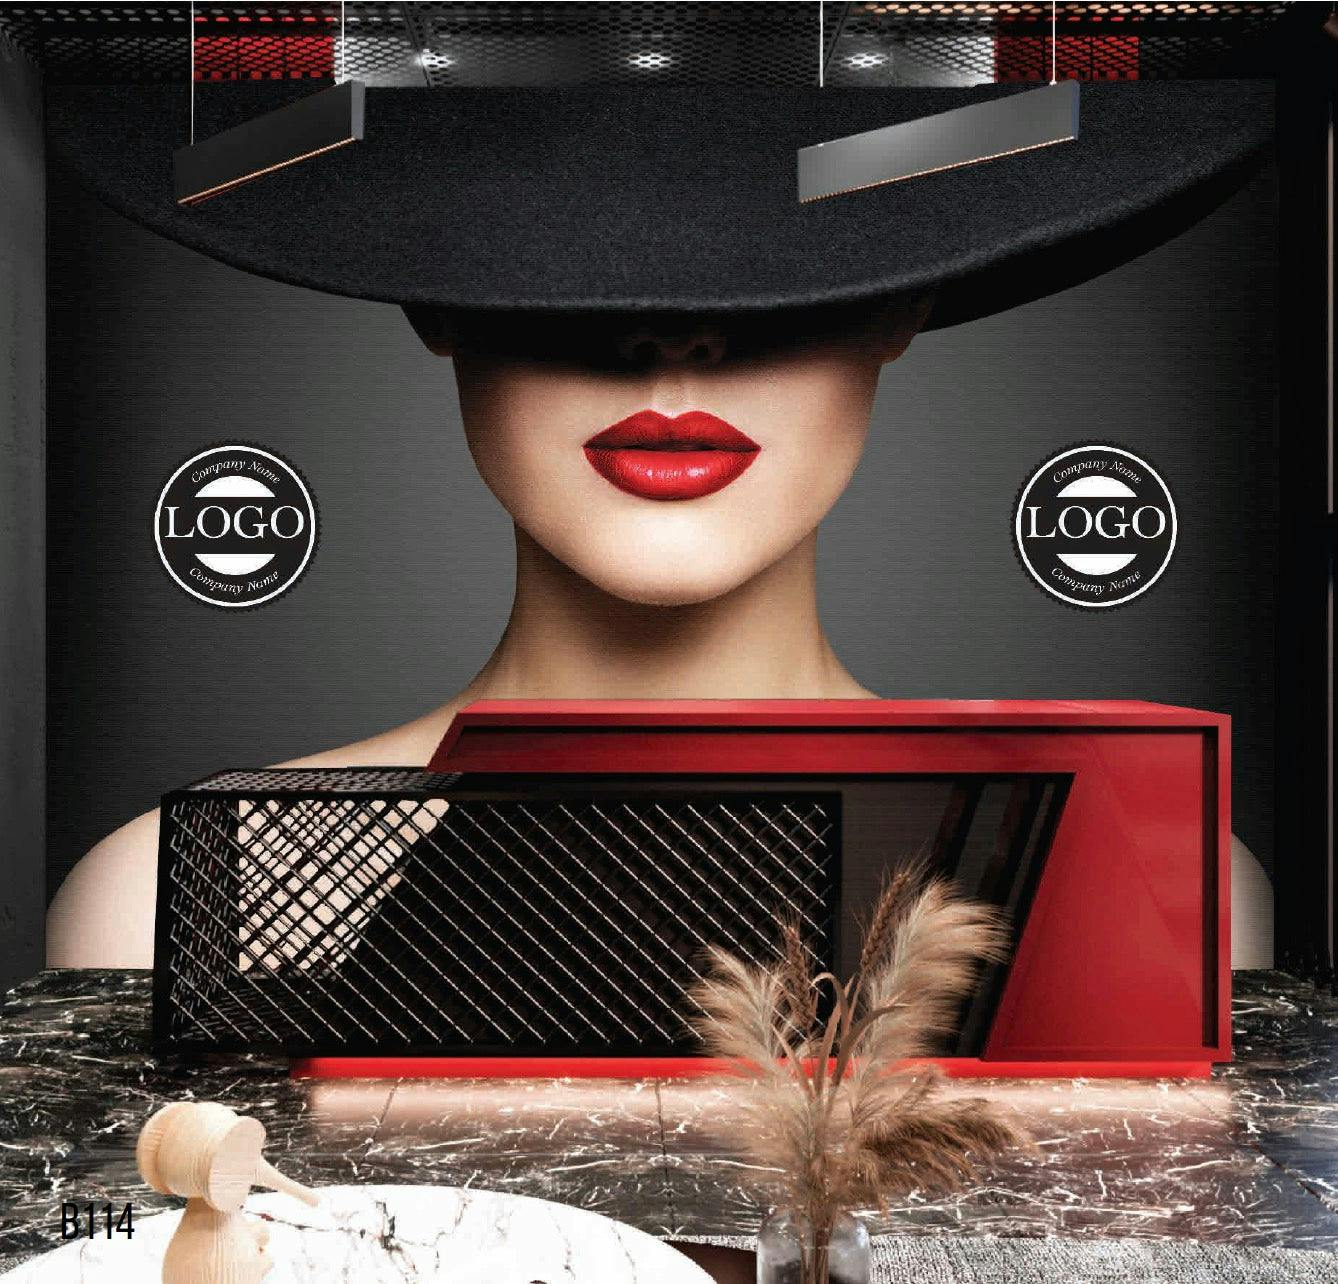 Elegance Wallpaper: Captivating Lady's Face Mural with Red Lipstick and Black Top Hat - Premium Fiber Canvas Print for Mesmerizing Visual Masterpiece